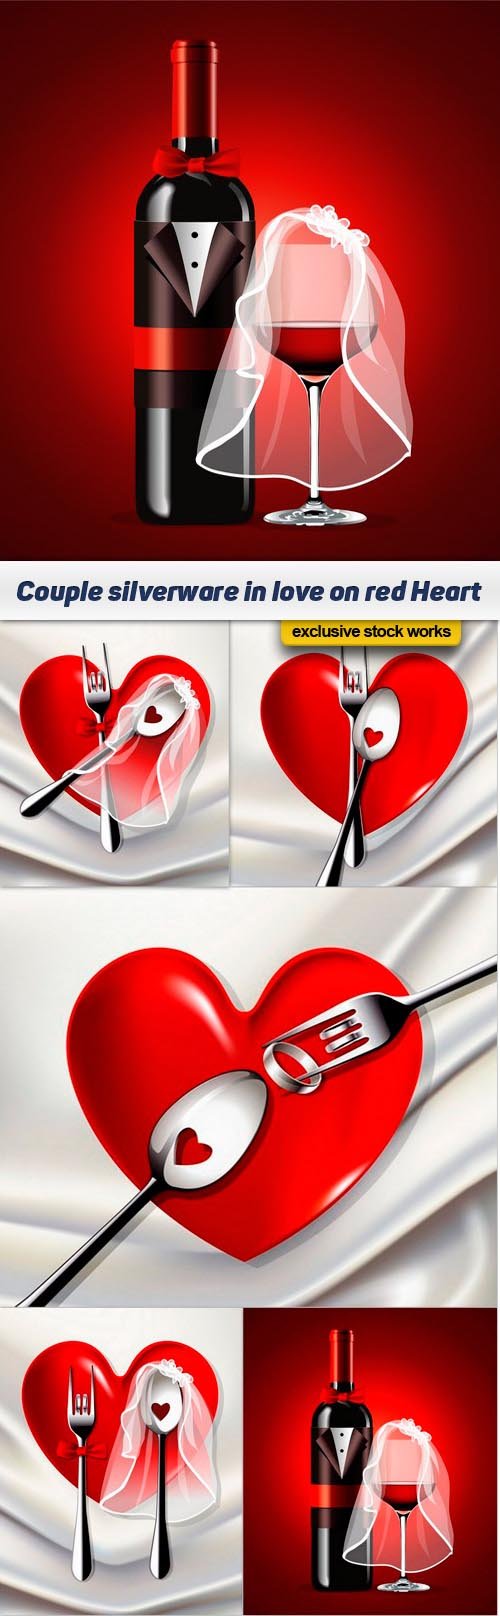 Couple silverware in love on red Heart - 5 EPS